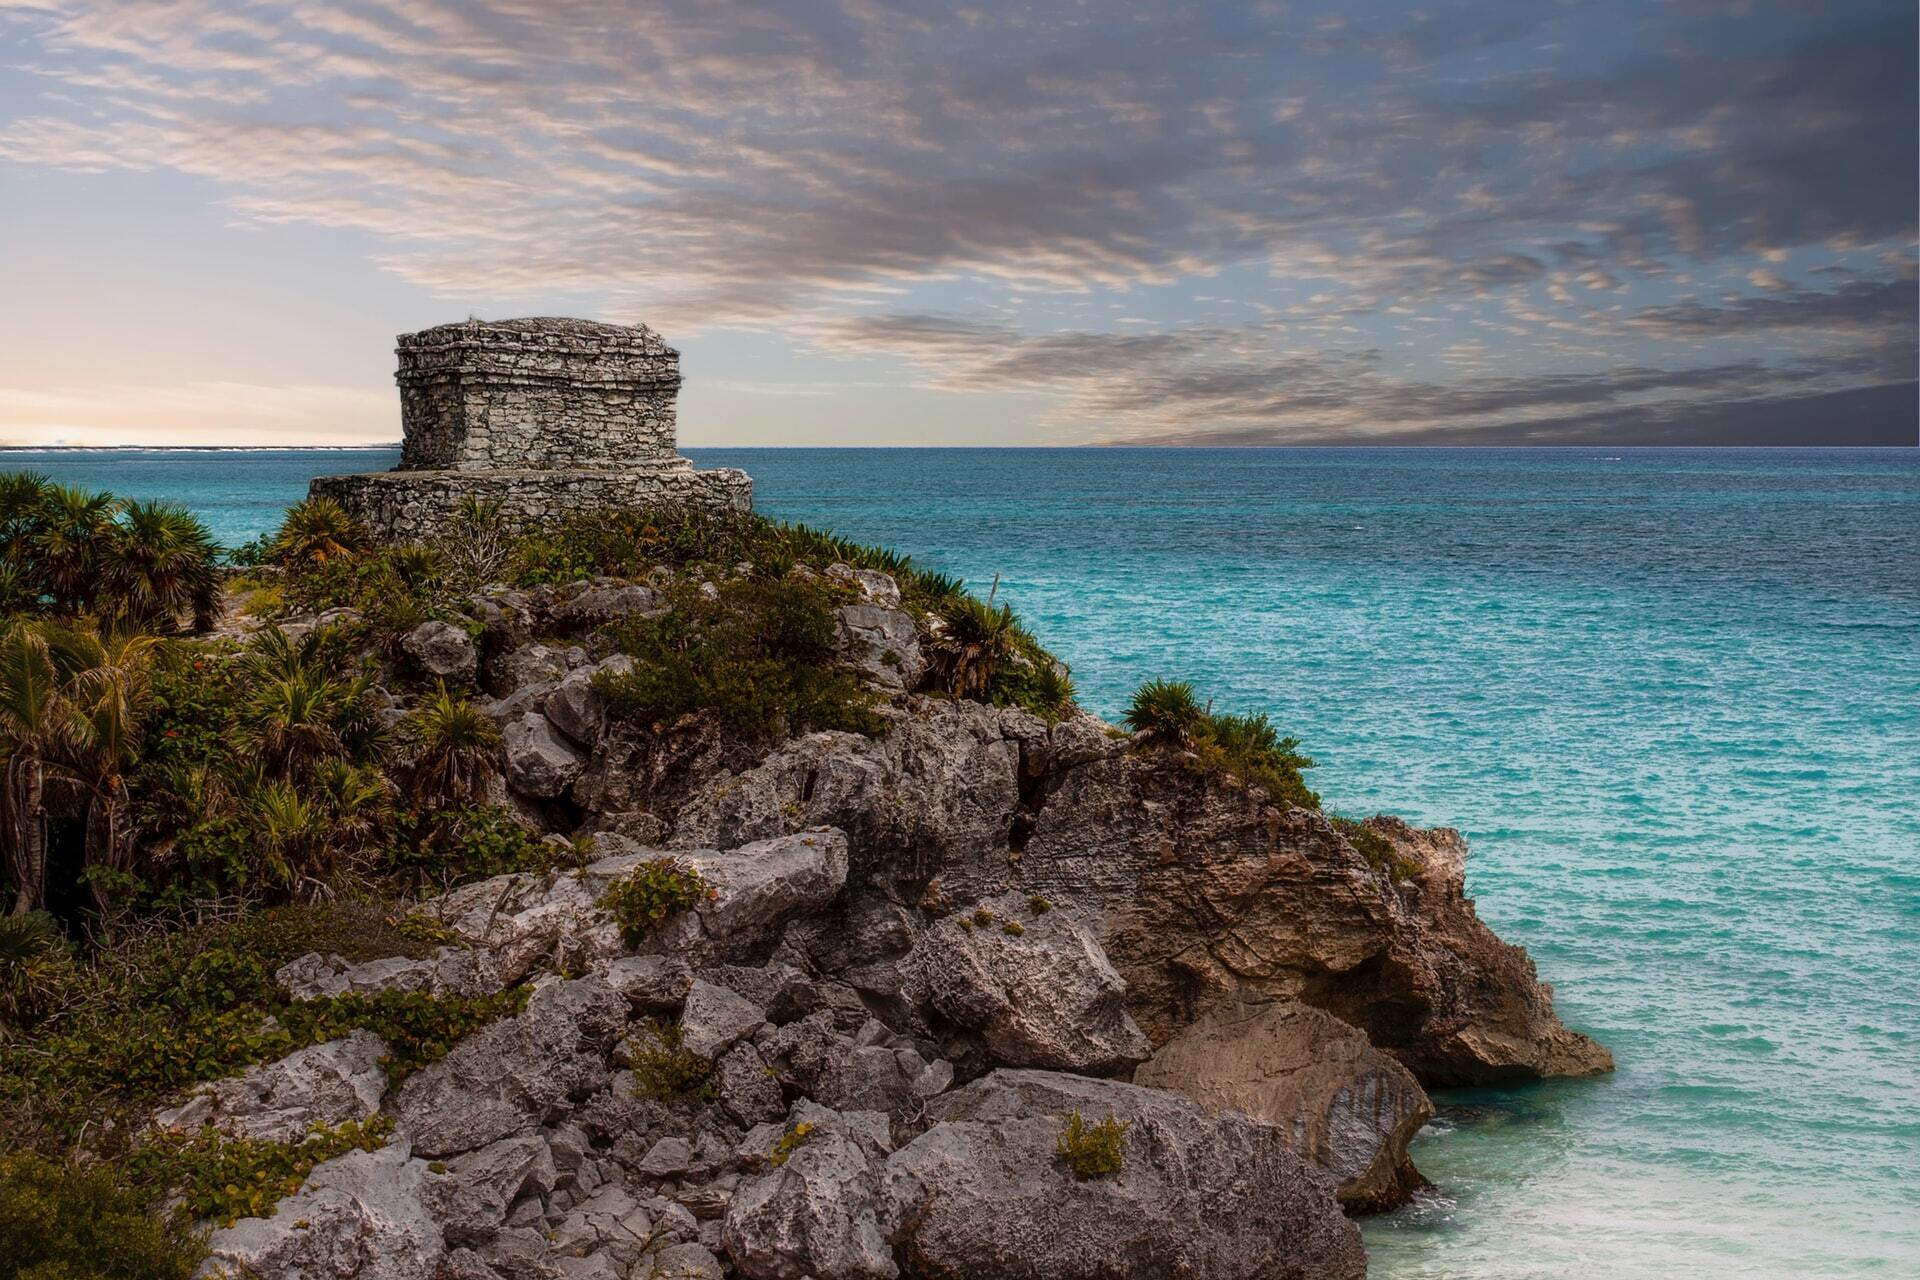 Buying a Tulum home as a Christmas Present